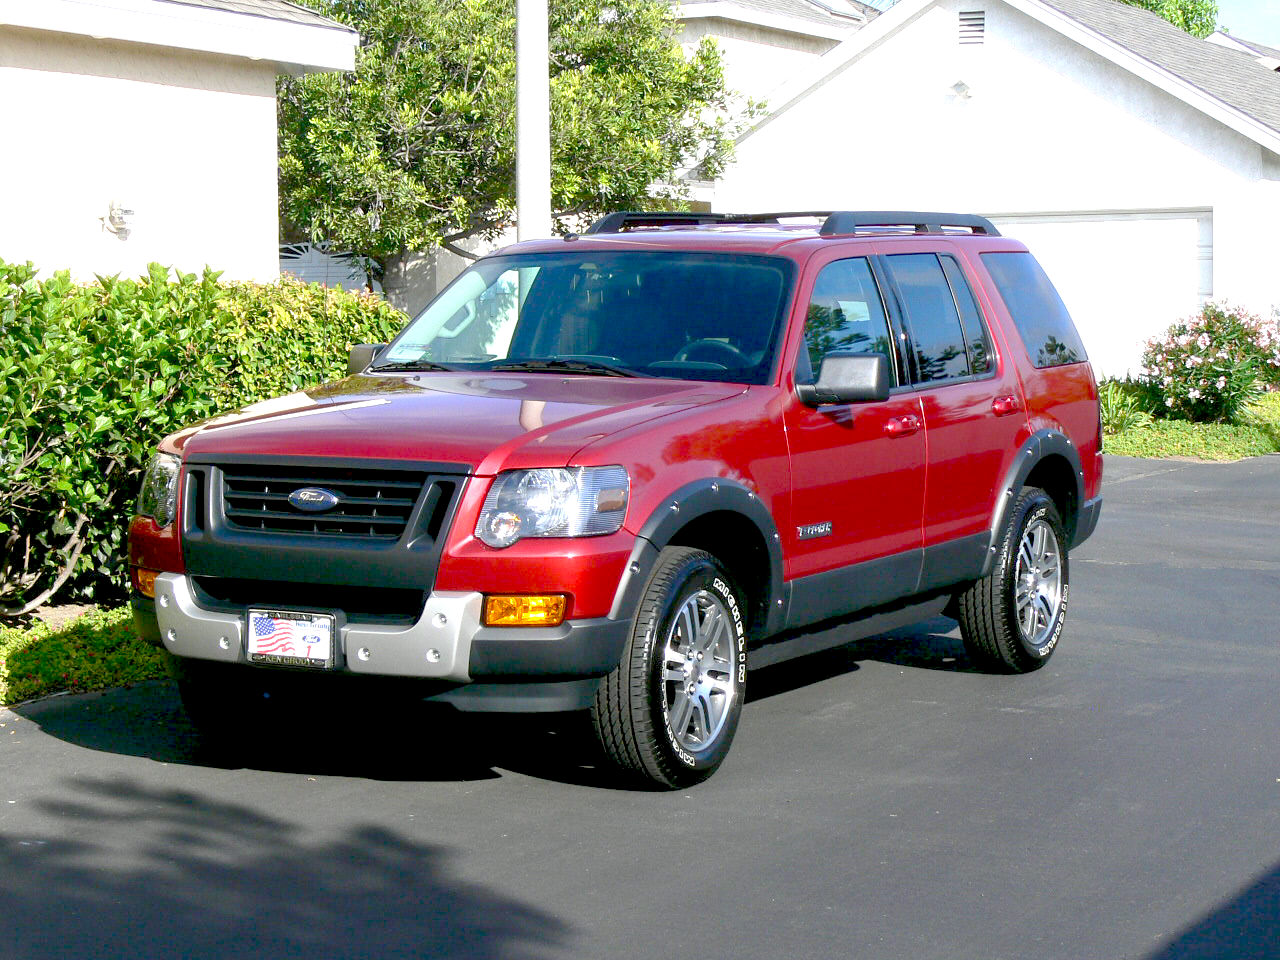 2007 Ford explorer limited edition #8